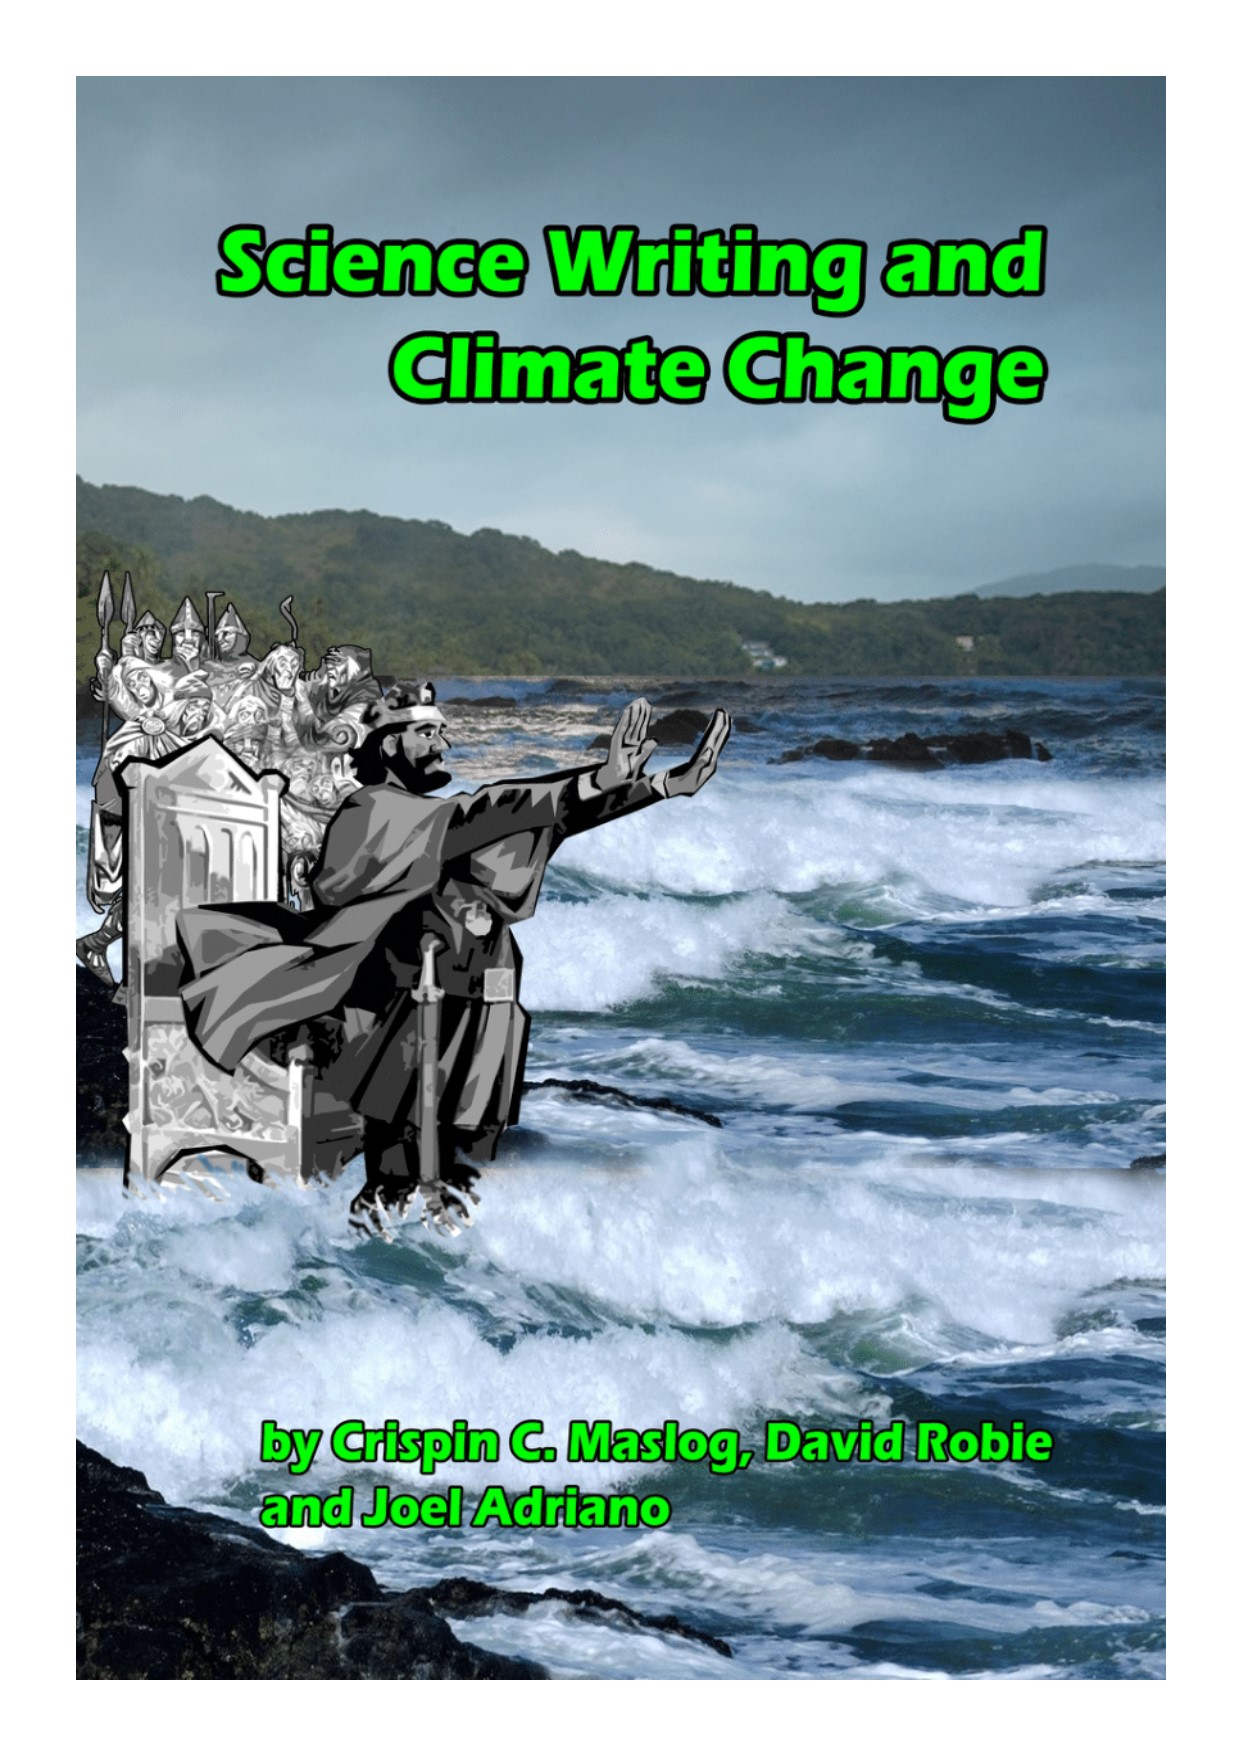 Science writing and climate change